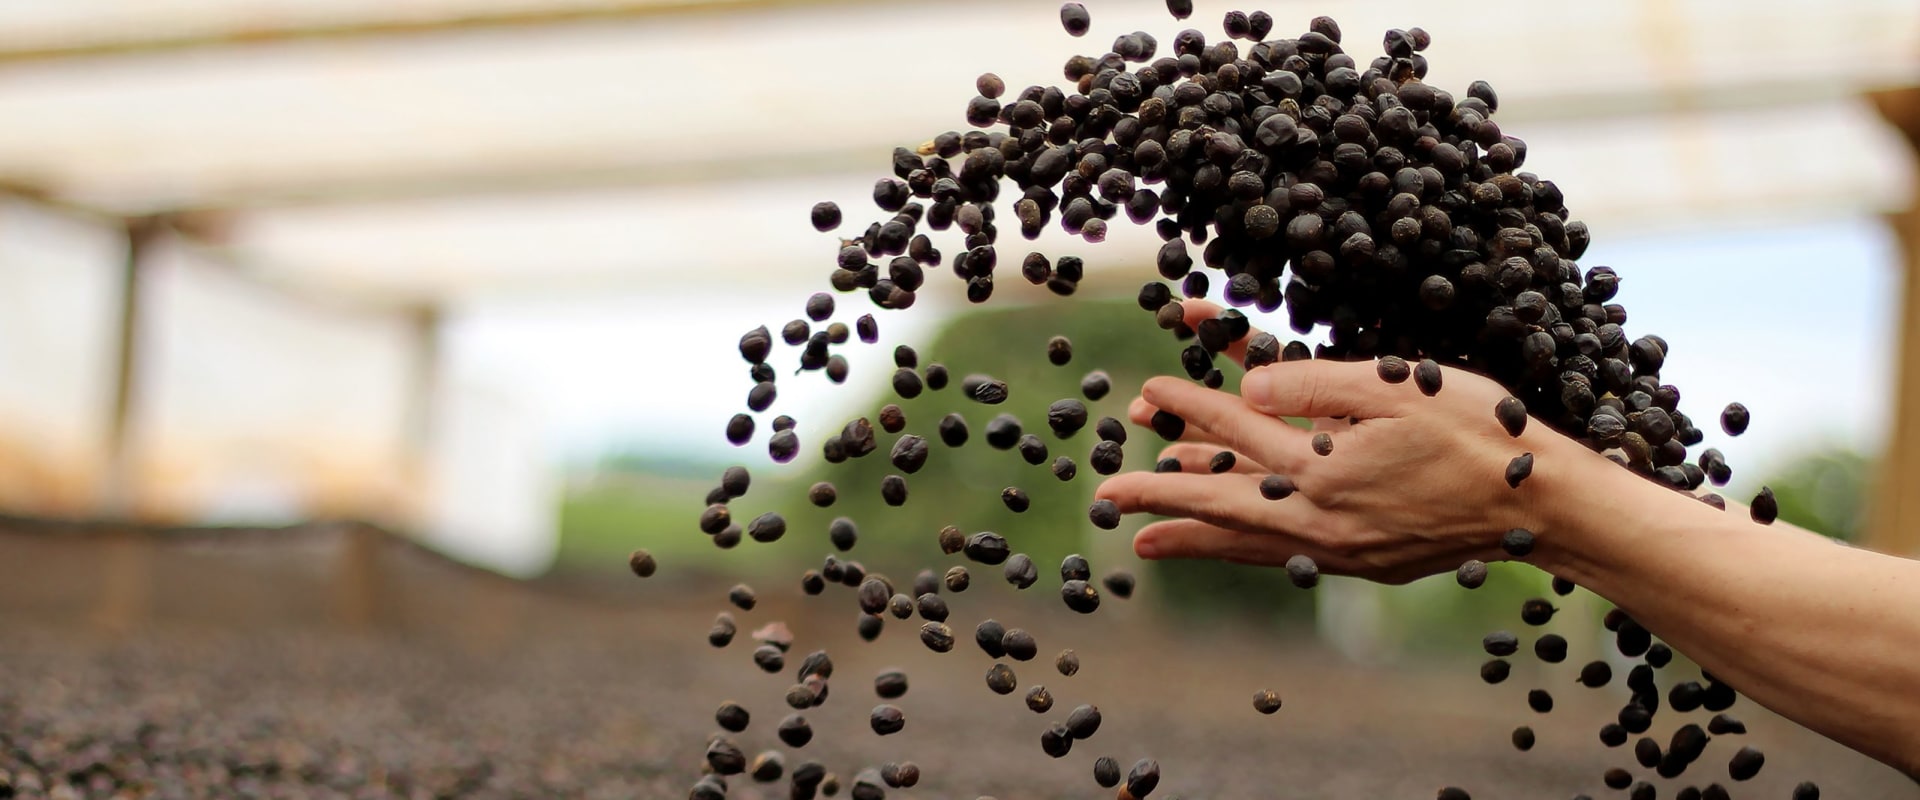 What are the sustainable practices of coffee?